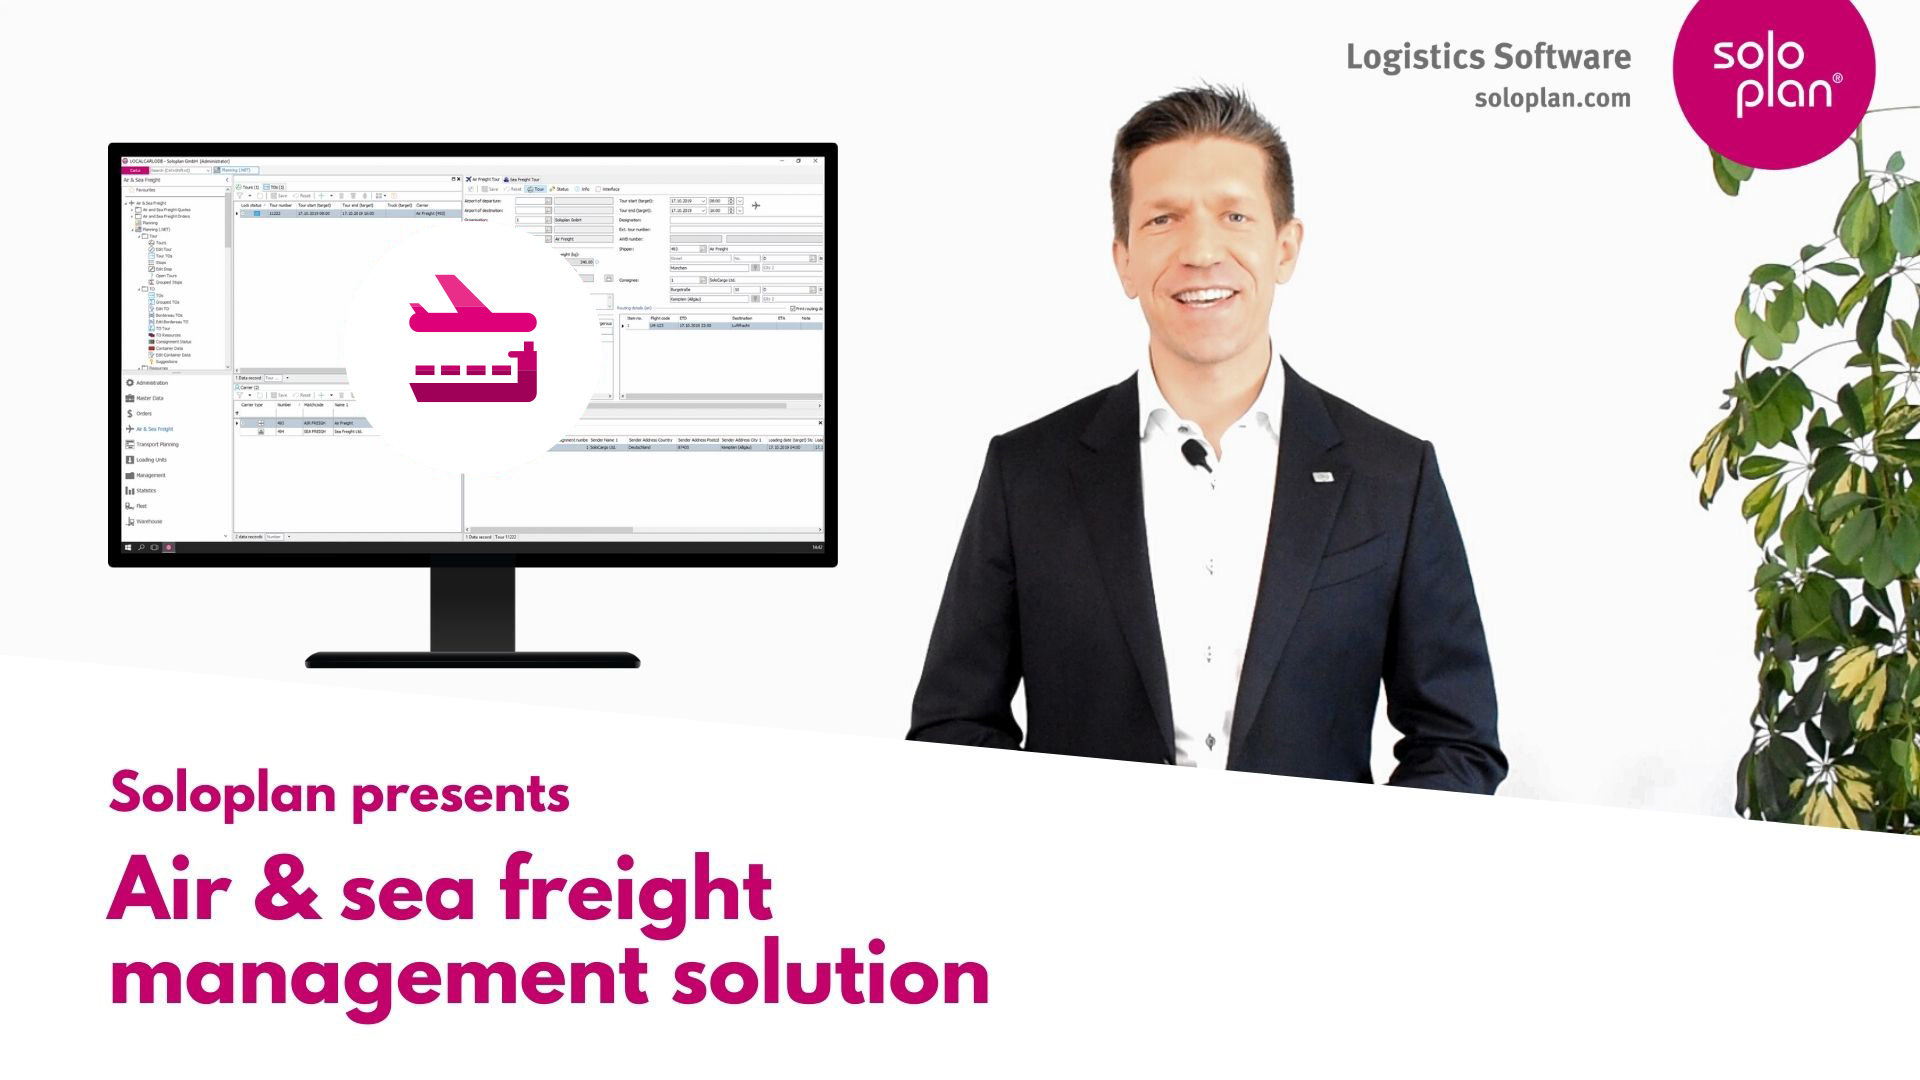 Air & sea freight management solution